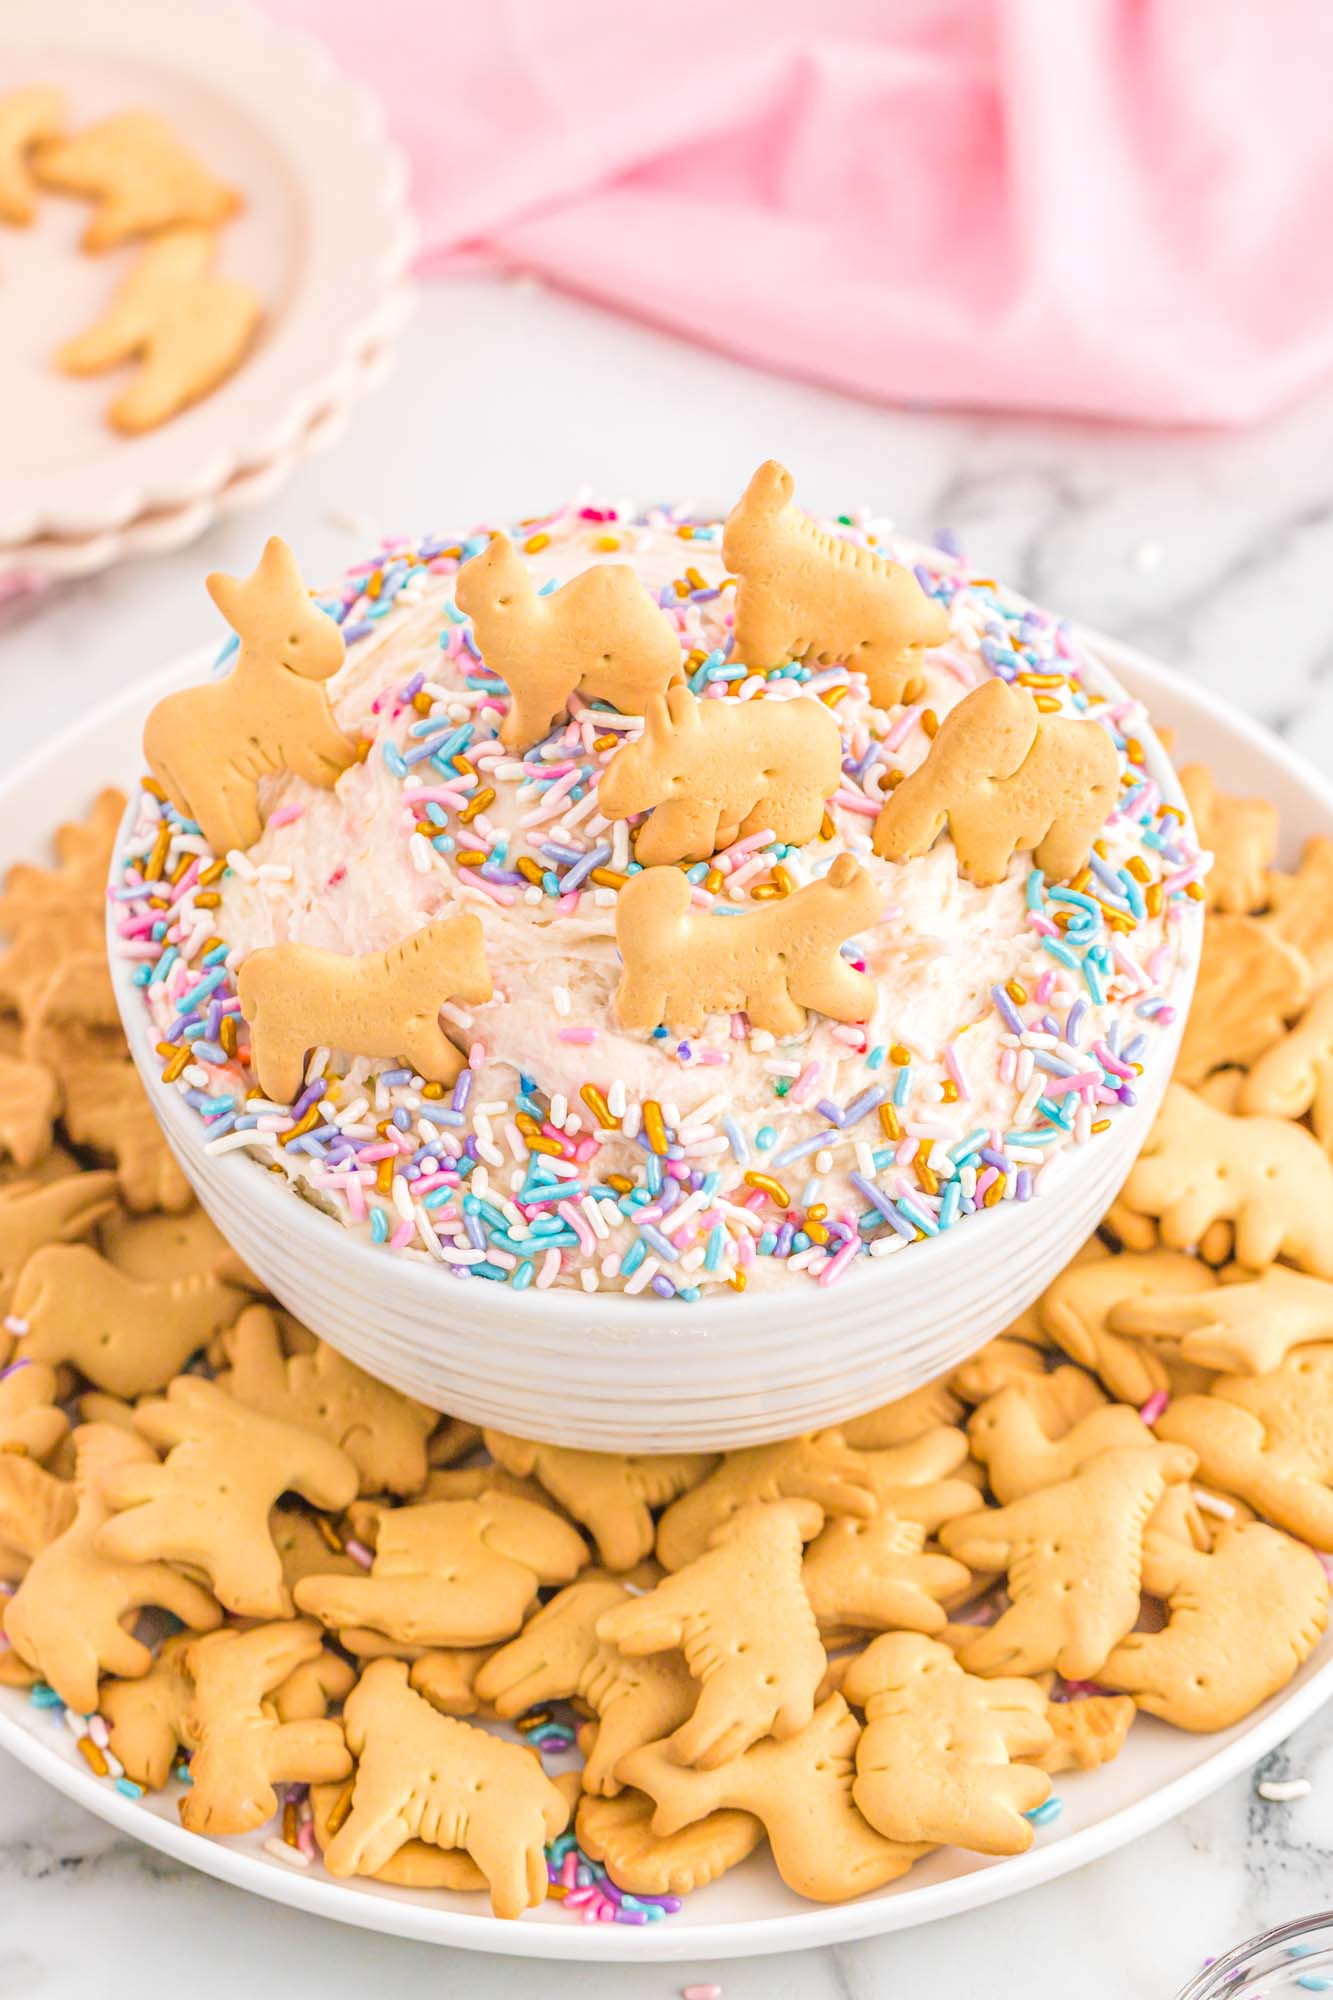 Bowl with funfetti dip and sprinkles, served with animal crackers on the side.